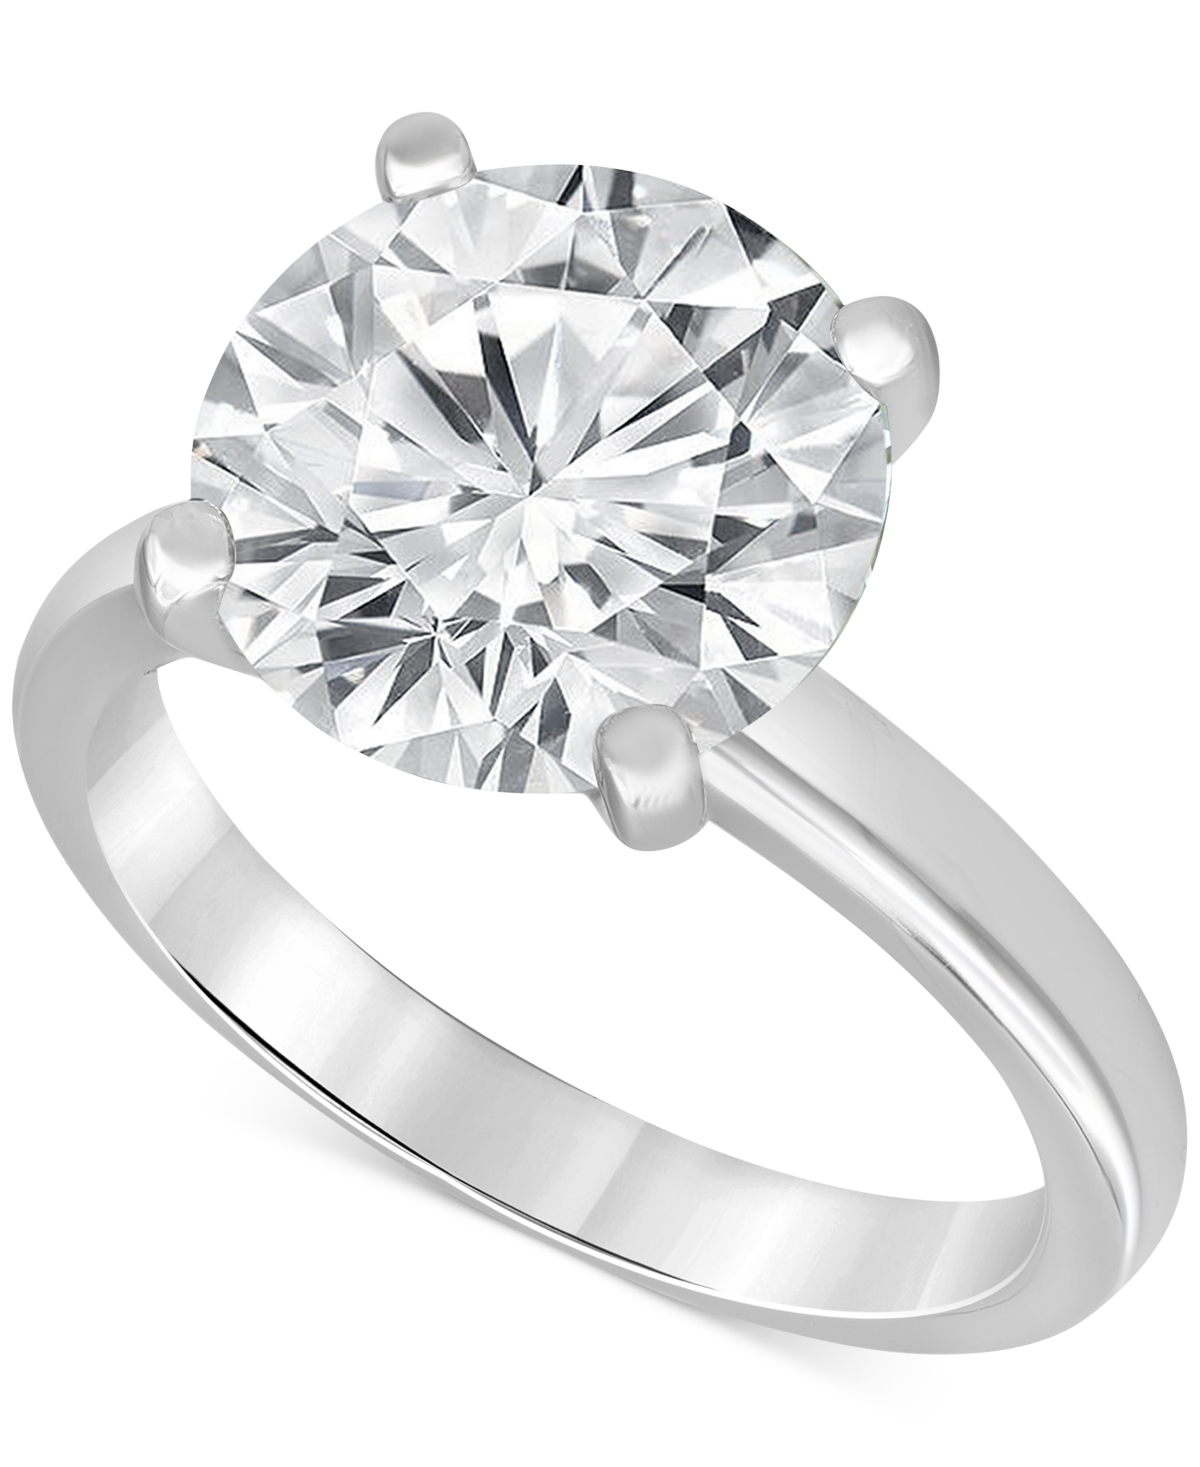 Badgley Mischka Certified Lab Grown Diamond Solitaire Engagement Ring (5 ct. t.w.) in 14k White Gold